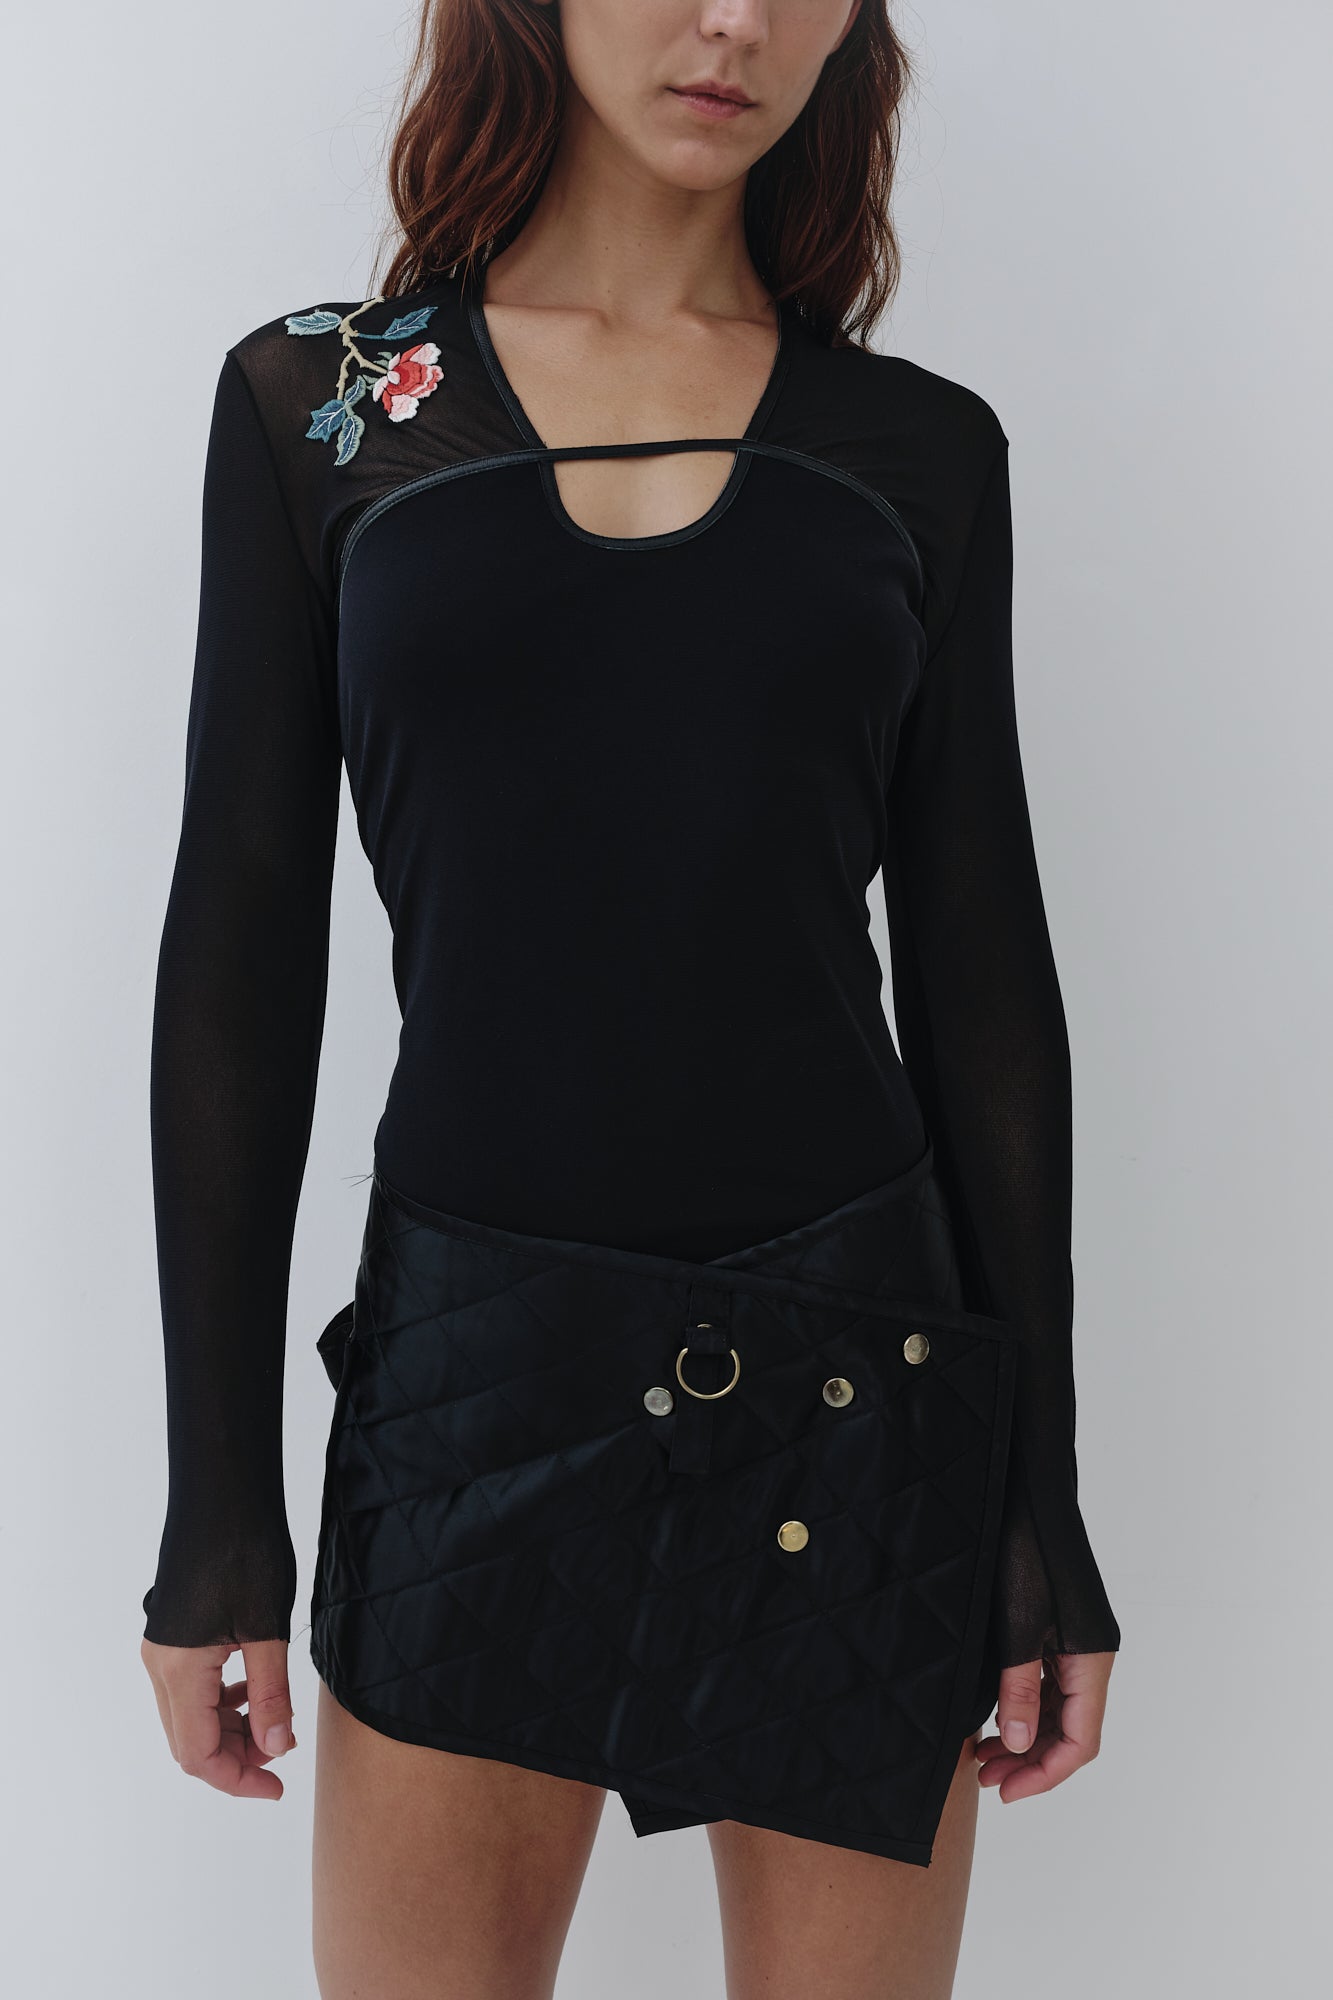 Vivienne Tam <br> 90's mesh embroidered cut-out top